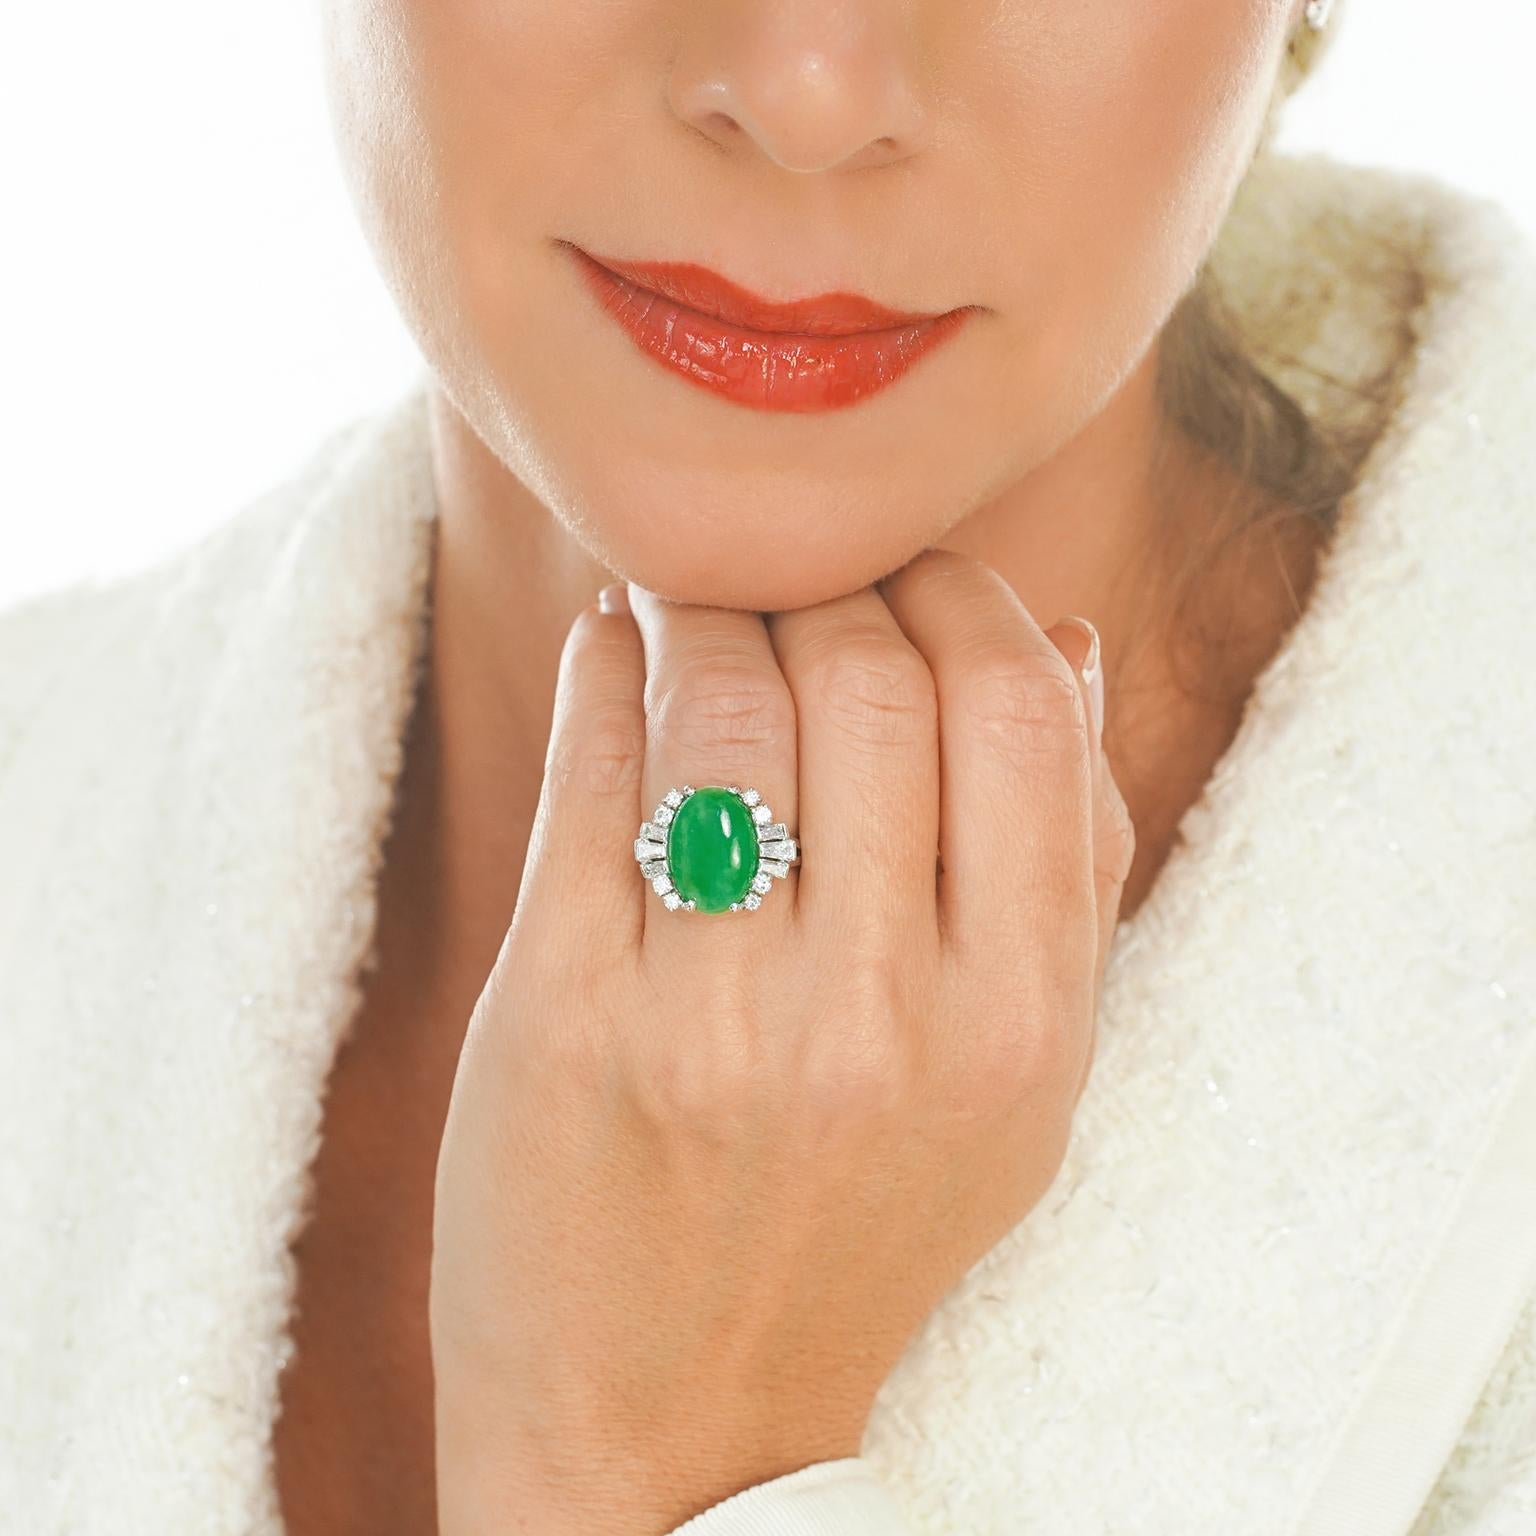 Circa 1950s, Platinum, by F&F Felger, Newark, NJ, American. This sublime fifties platinum ring features brilliant white diamonds (G color VS clarity) surrounding a superb natural green jade cabochon. Using only the finest materials available, this